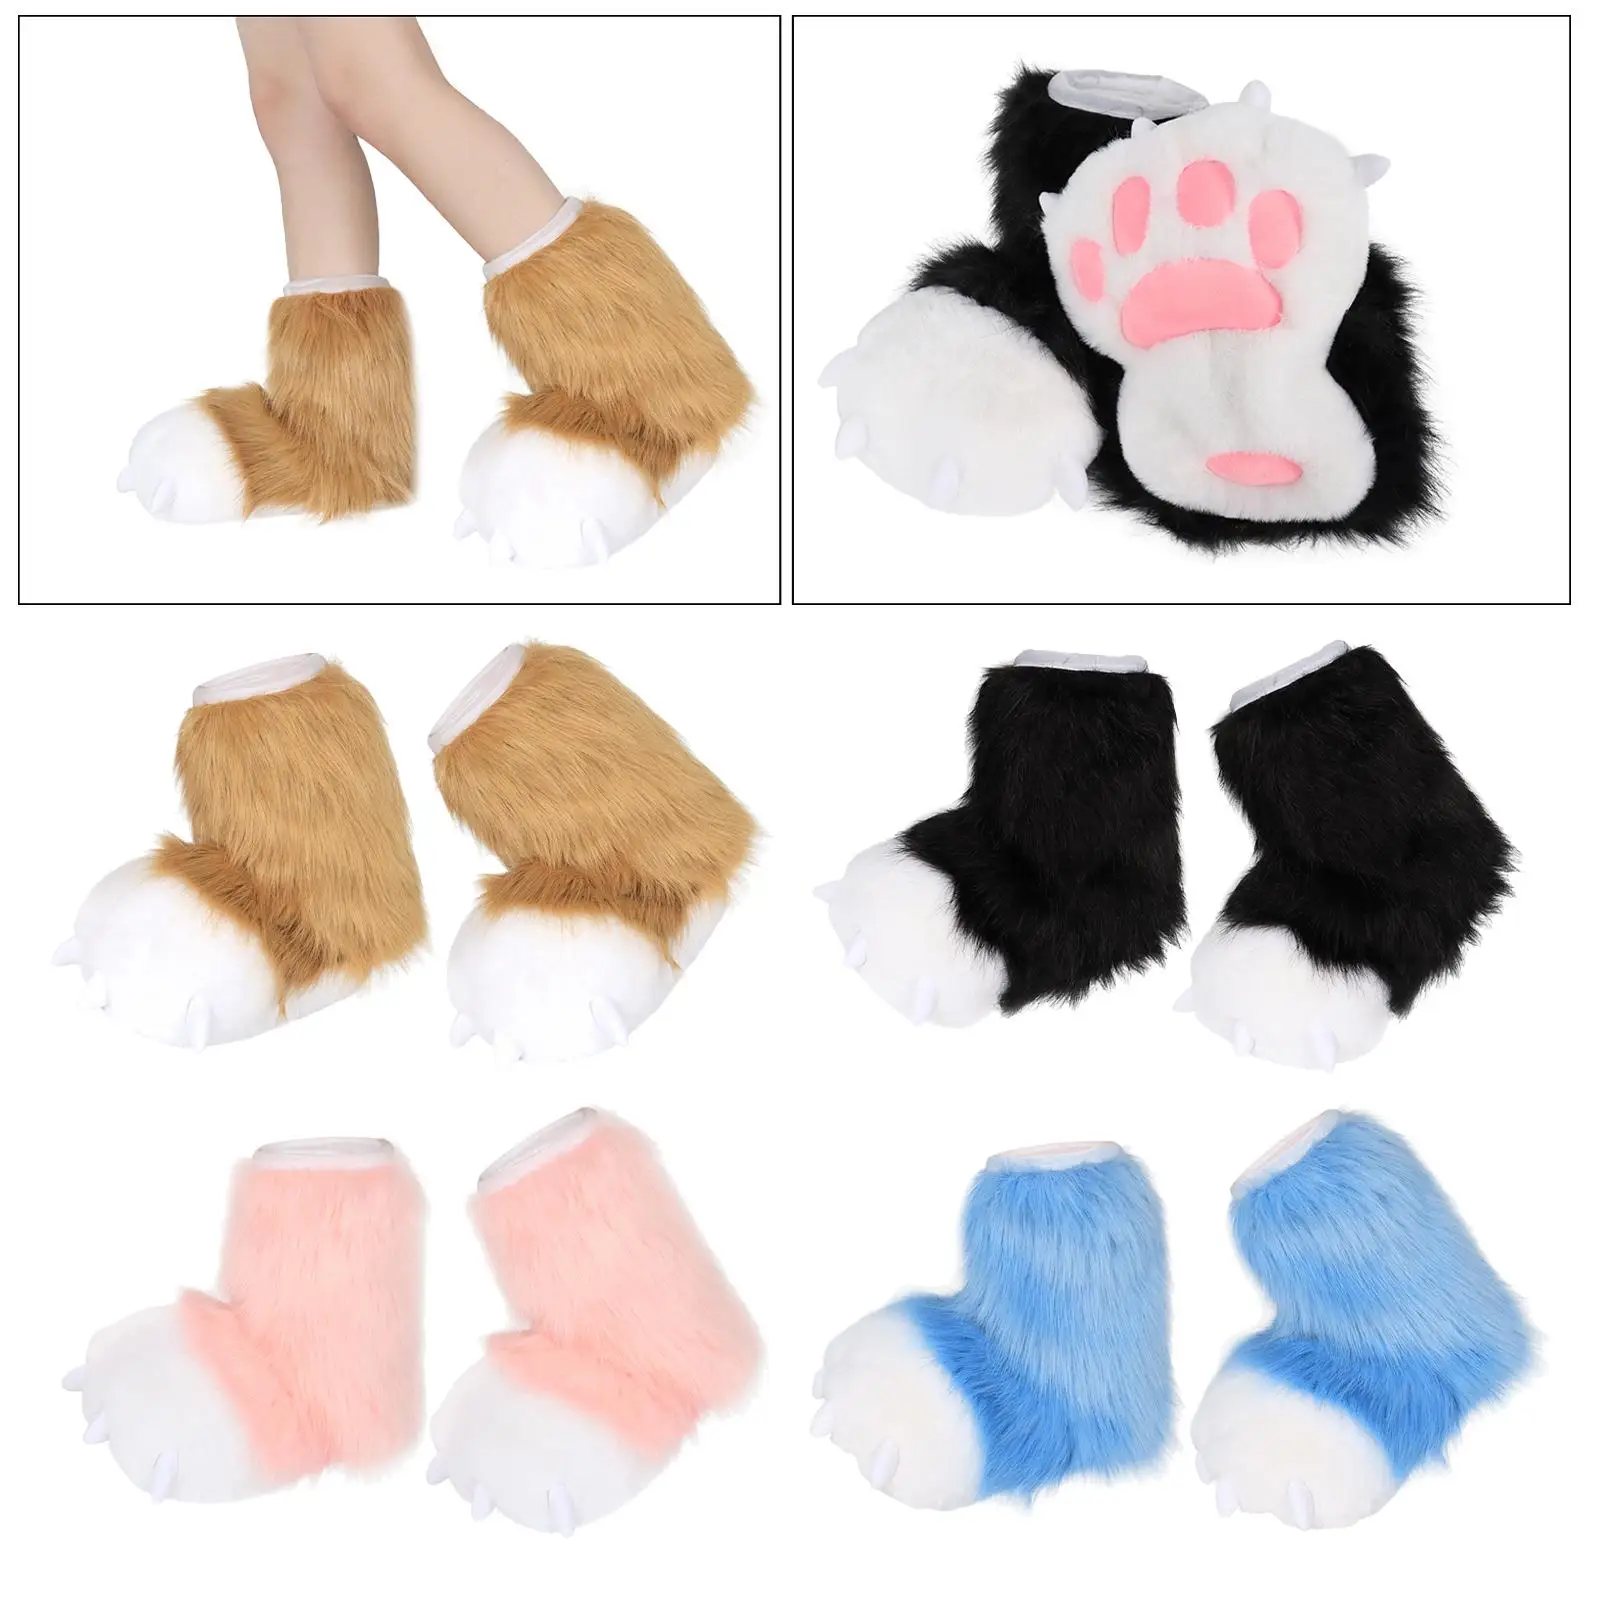 Paw Cosplay Accessories Soft Plush Beast Slippers for Halloween Kids